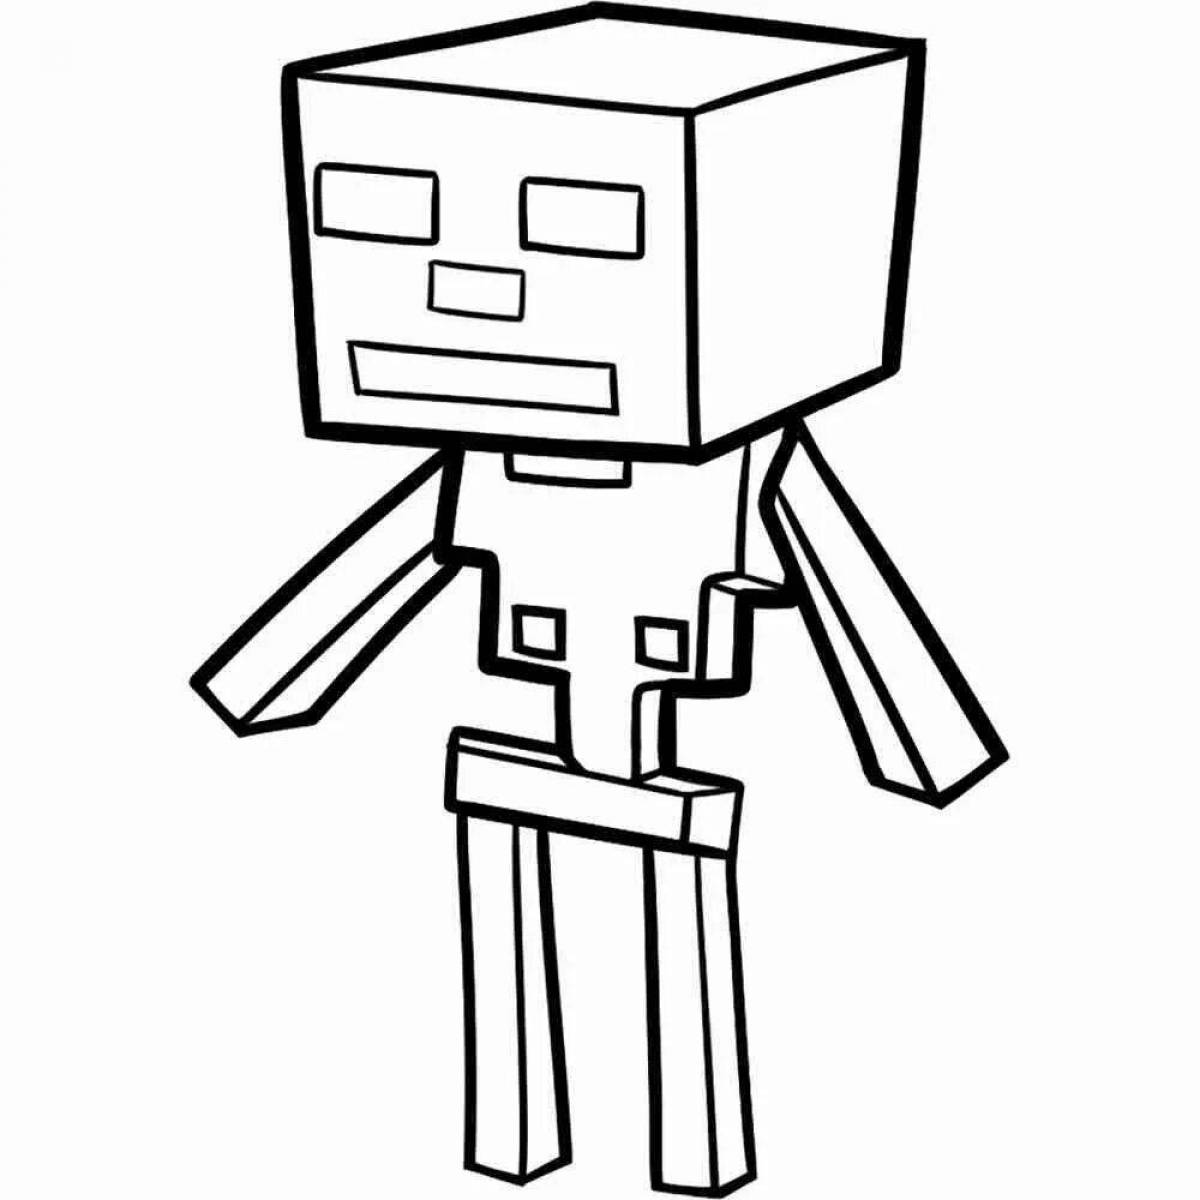 Artistic minecraft spider coloring page